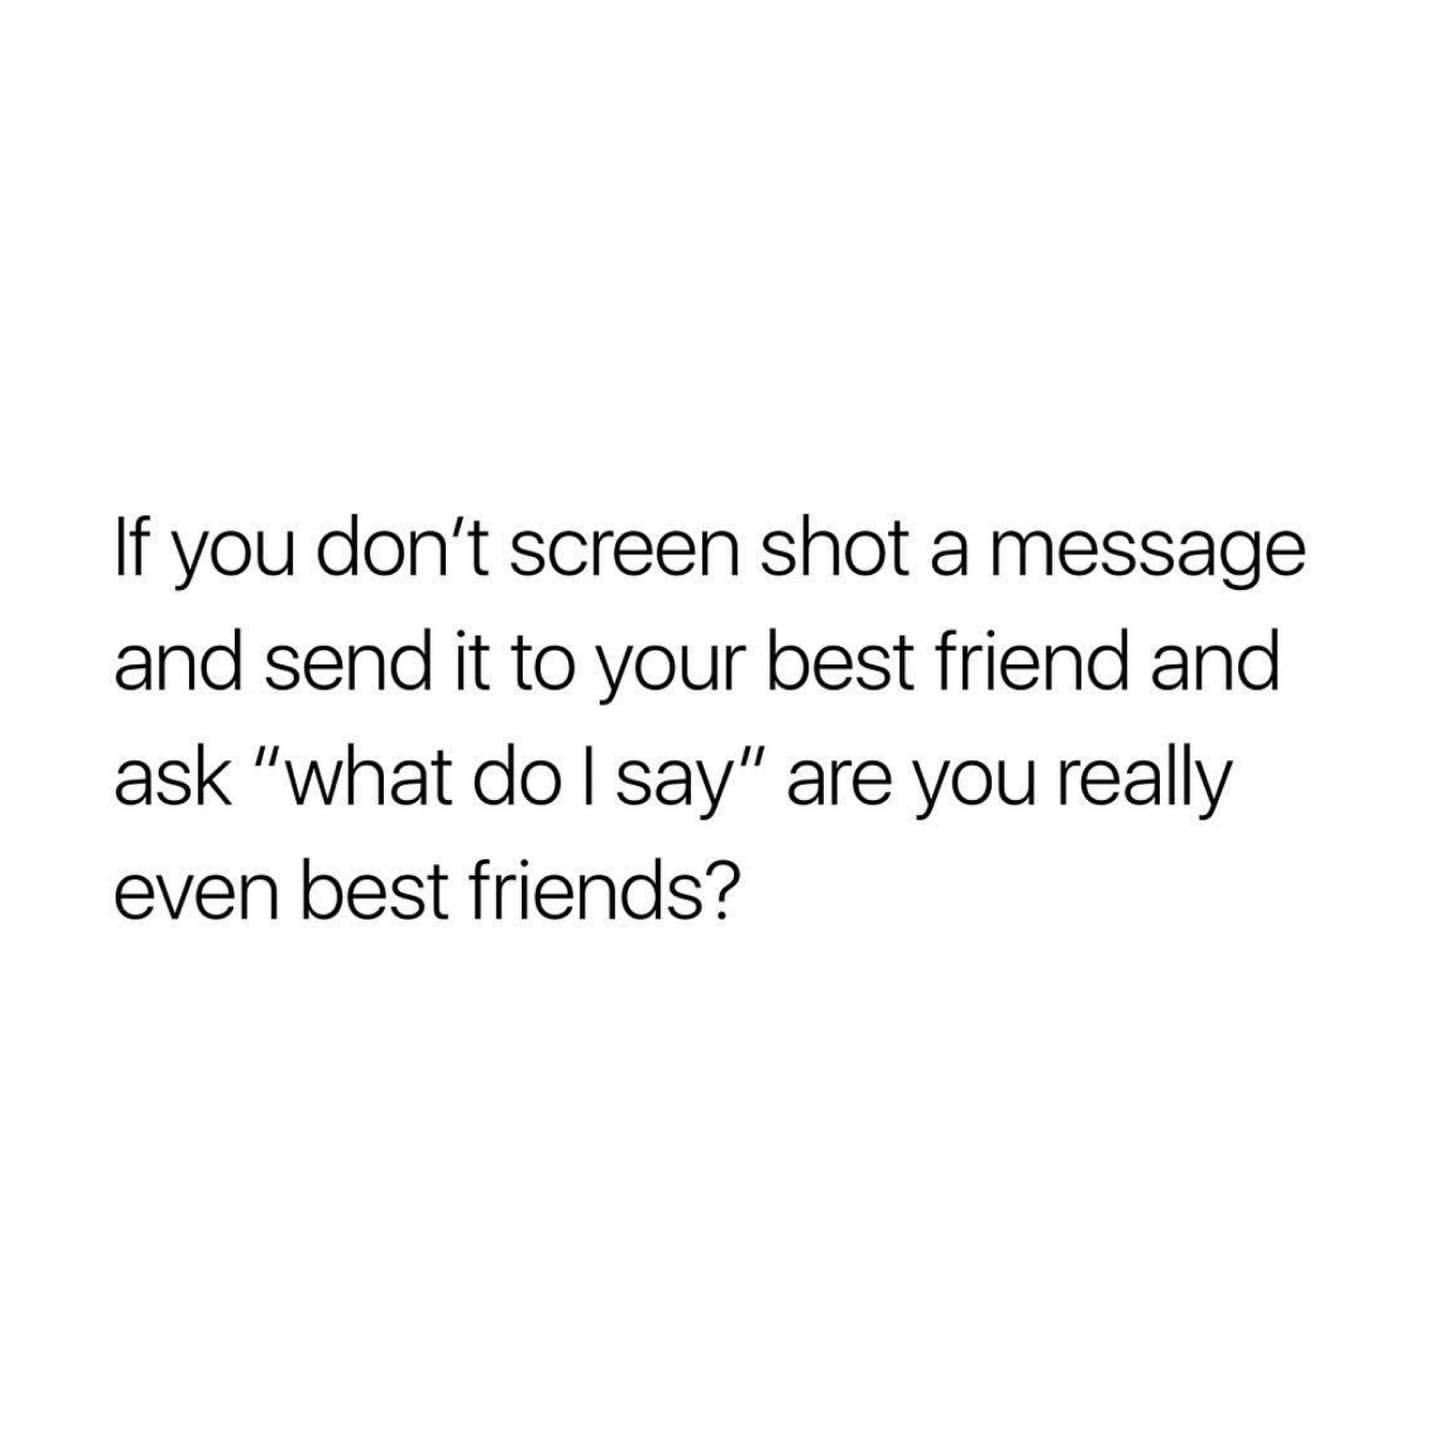 If you don't screen shot a message and send it to your best friend and ask "what do I say" are you really even best friends?